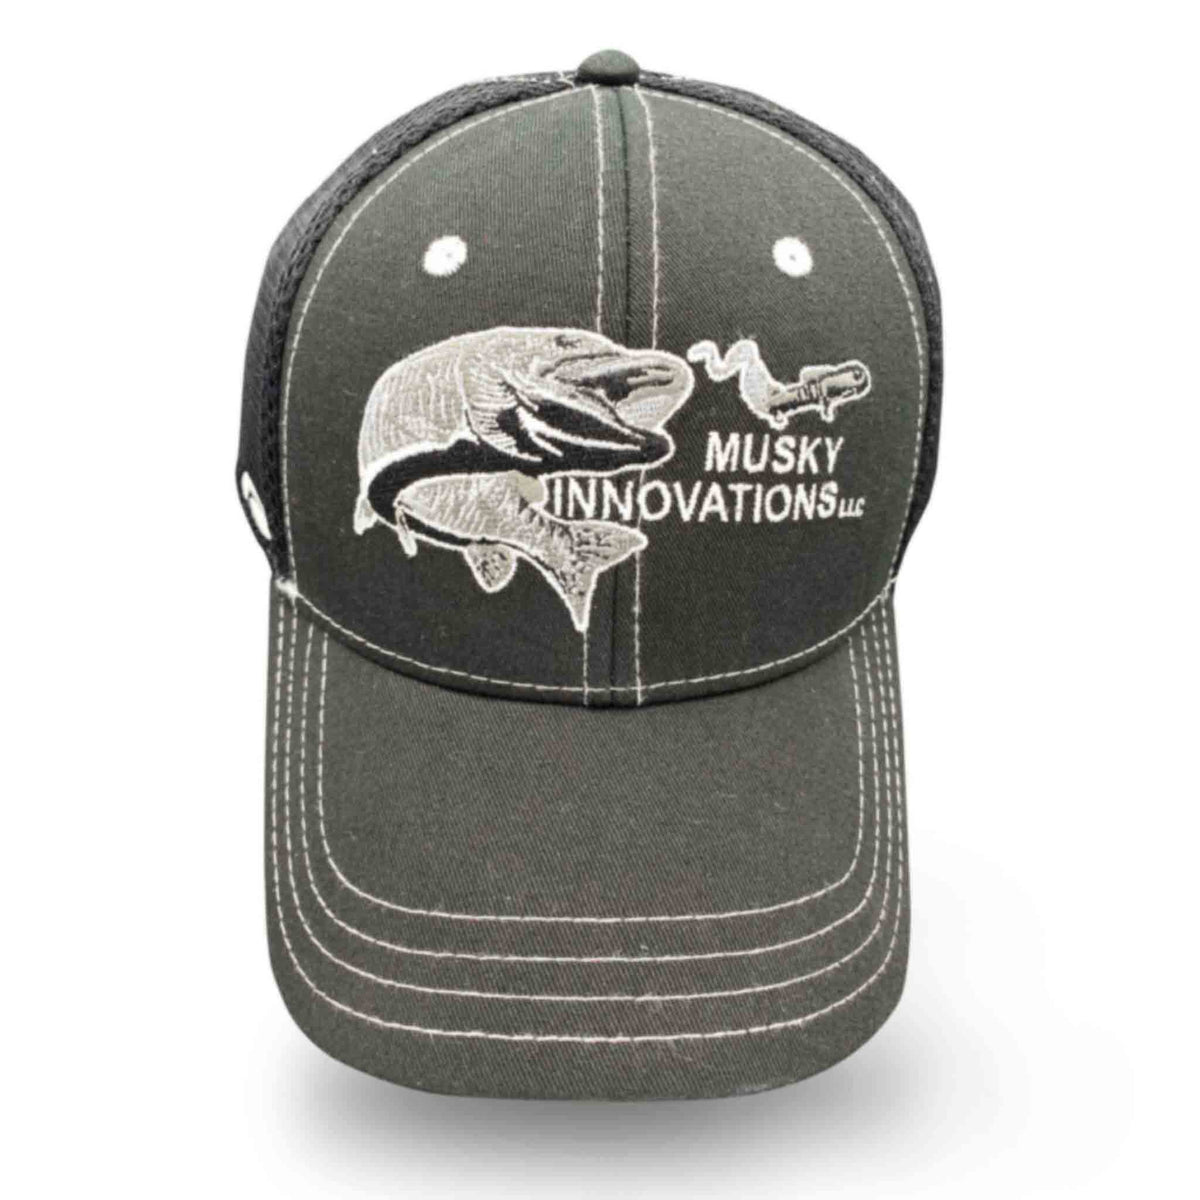 Musky Innovations Black Hat with Black/White Logo One Size Hats